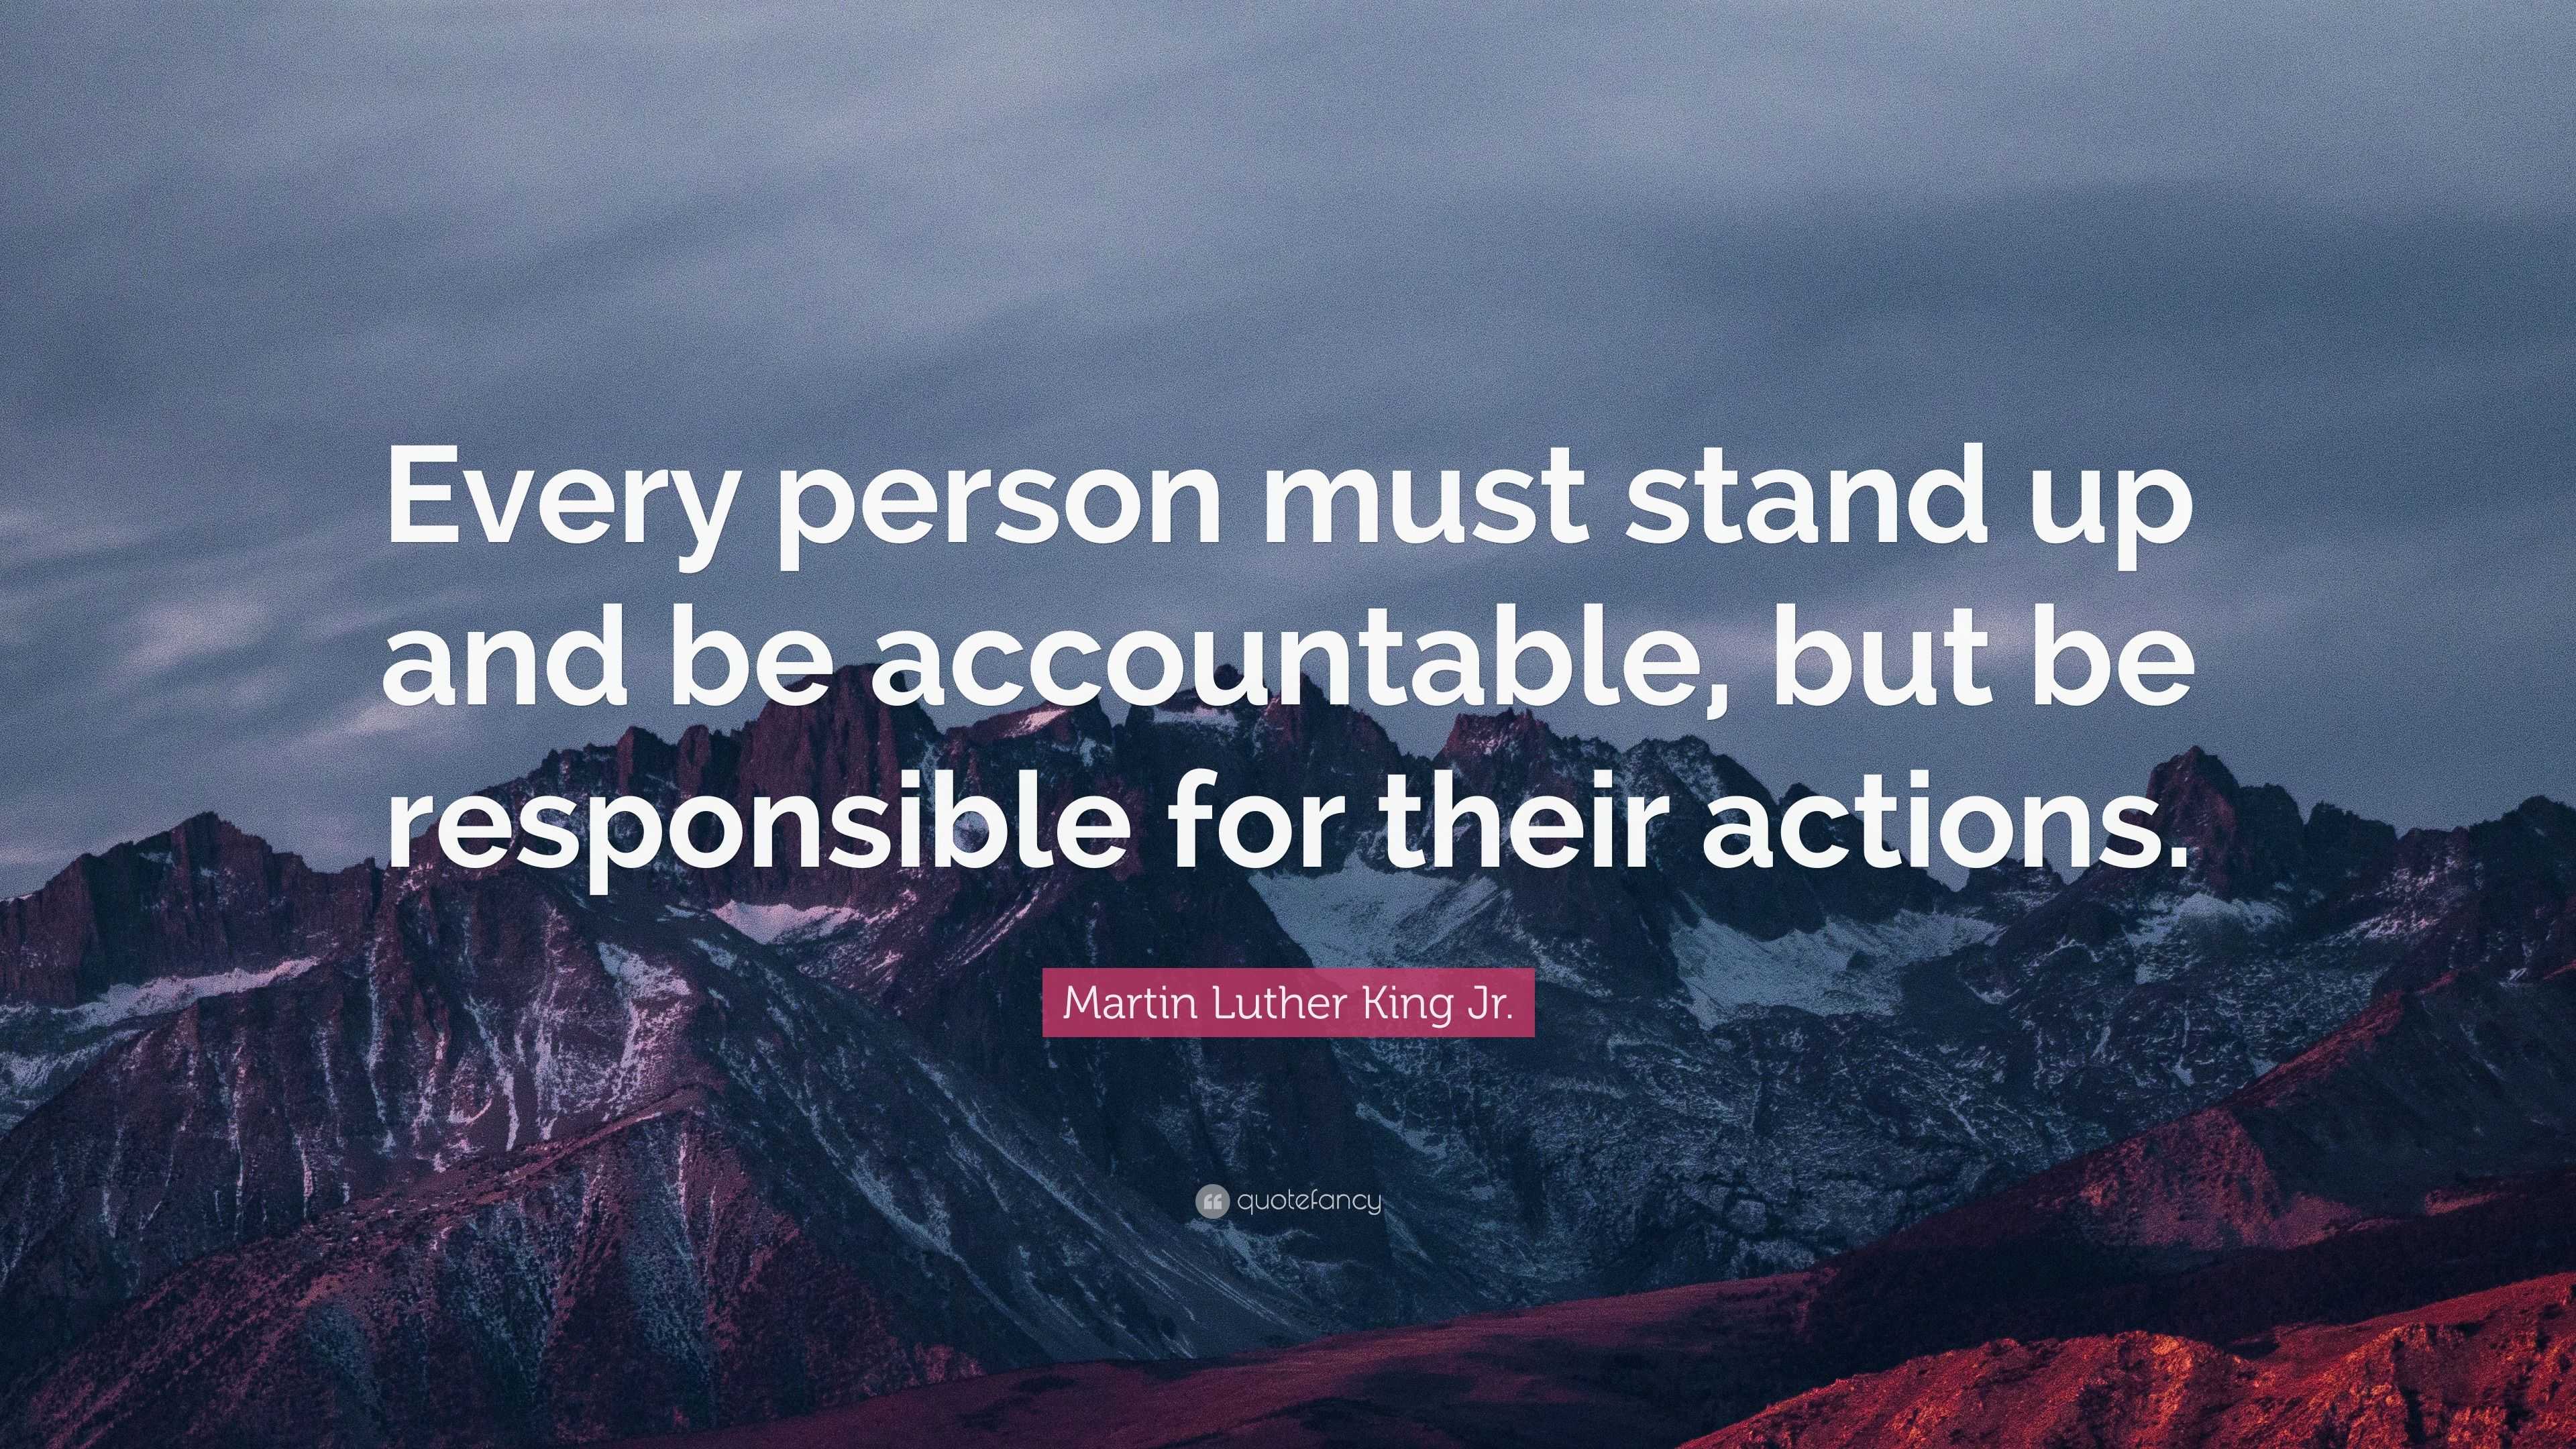 Martin Luther King Jr. Quote: “Every person must stand up and be ...